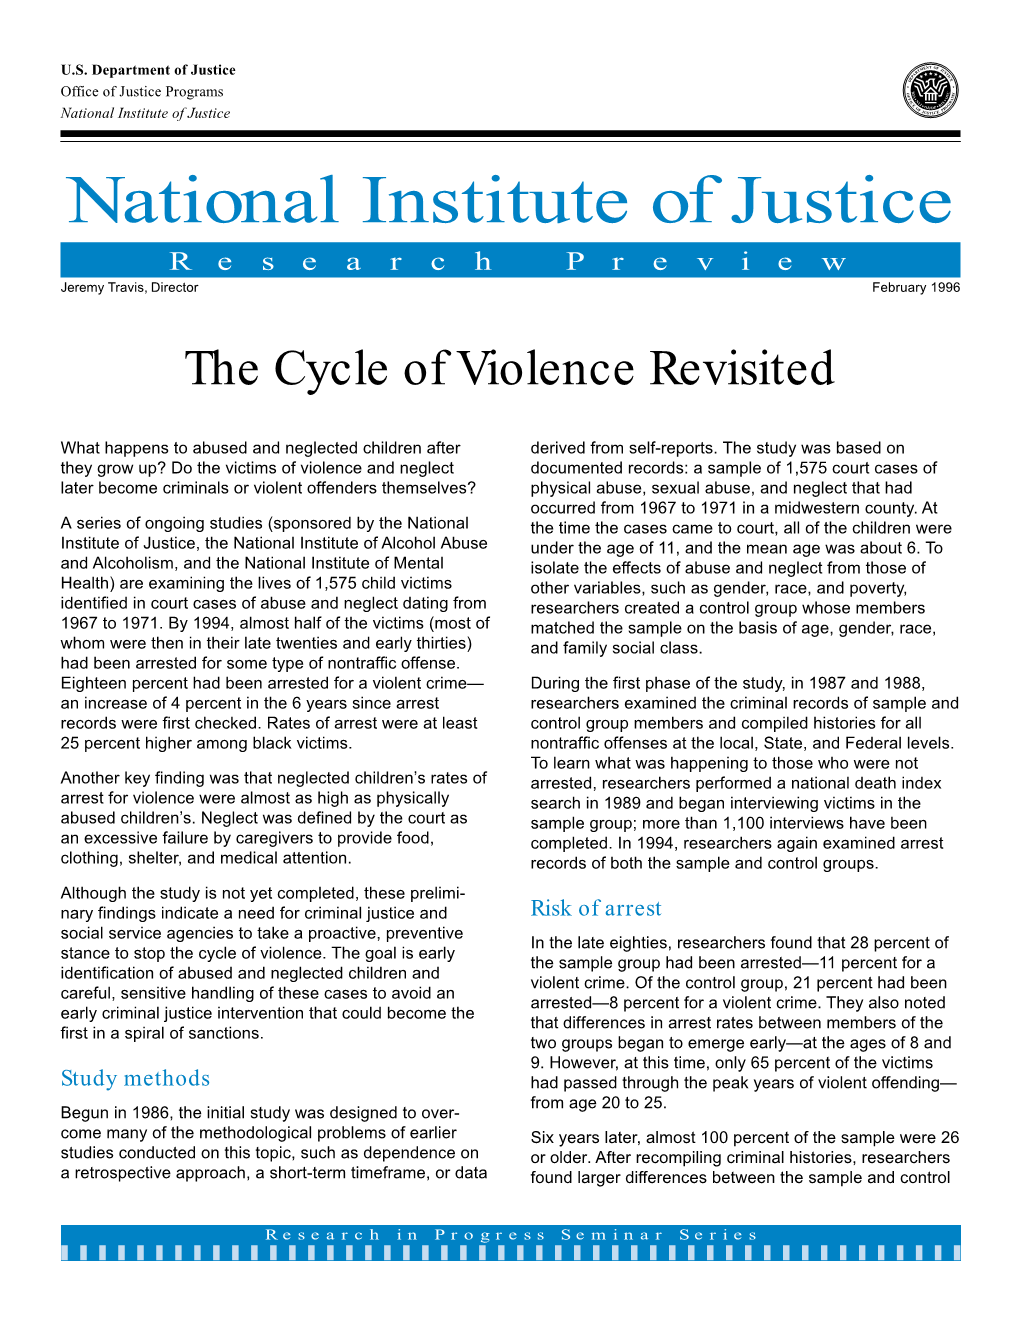 The Cycle of Violence Revisited